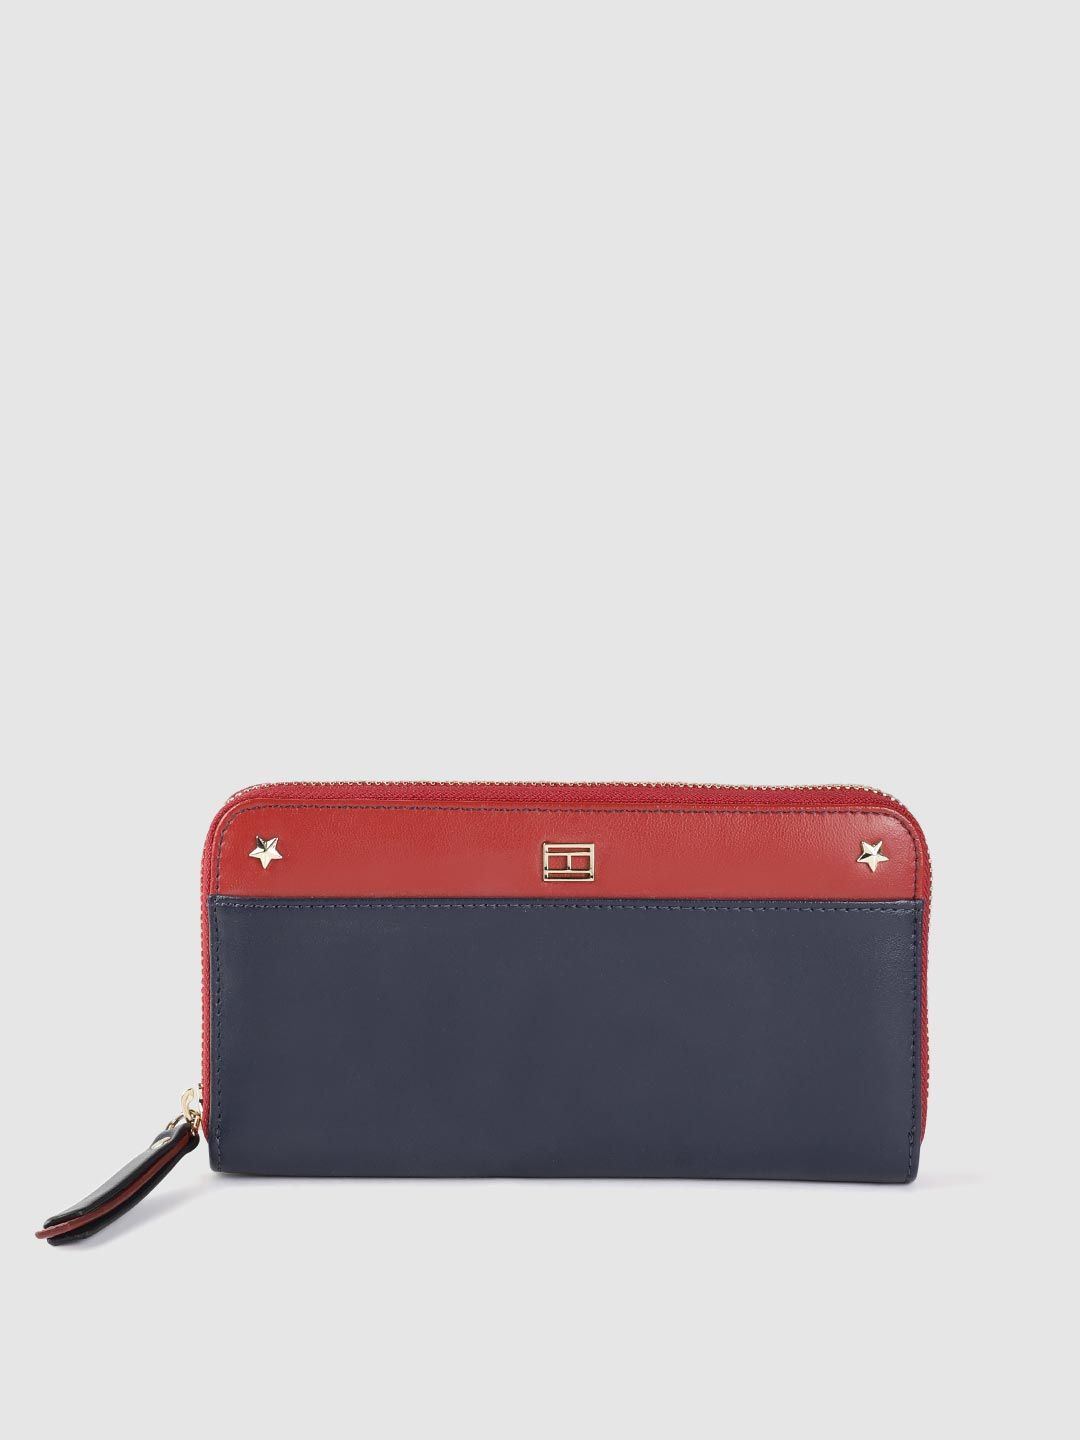 Tommy Hilfiger Women Navy Blue & Red Colourblocked Leather Zip Around Wallet Price in India